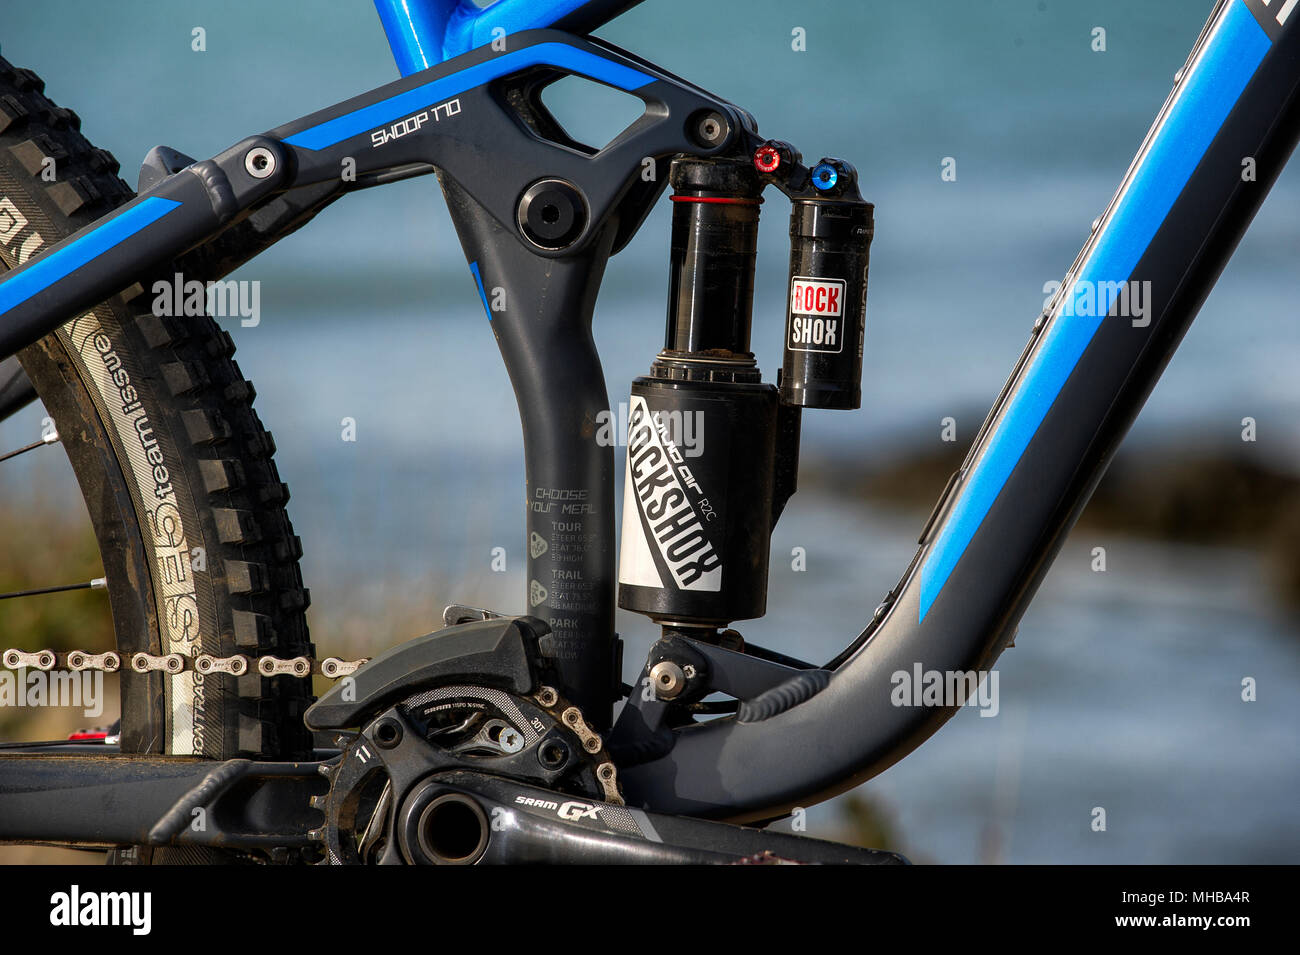 mountain bike front and rear suspension